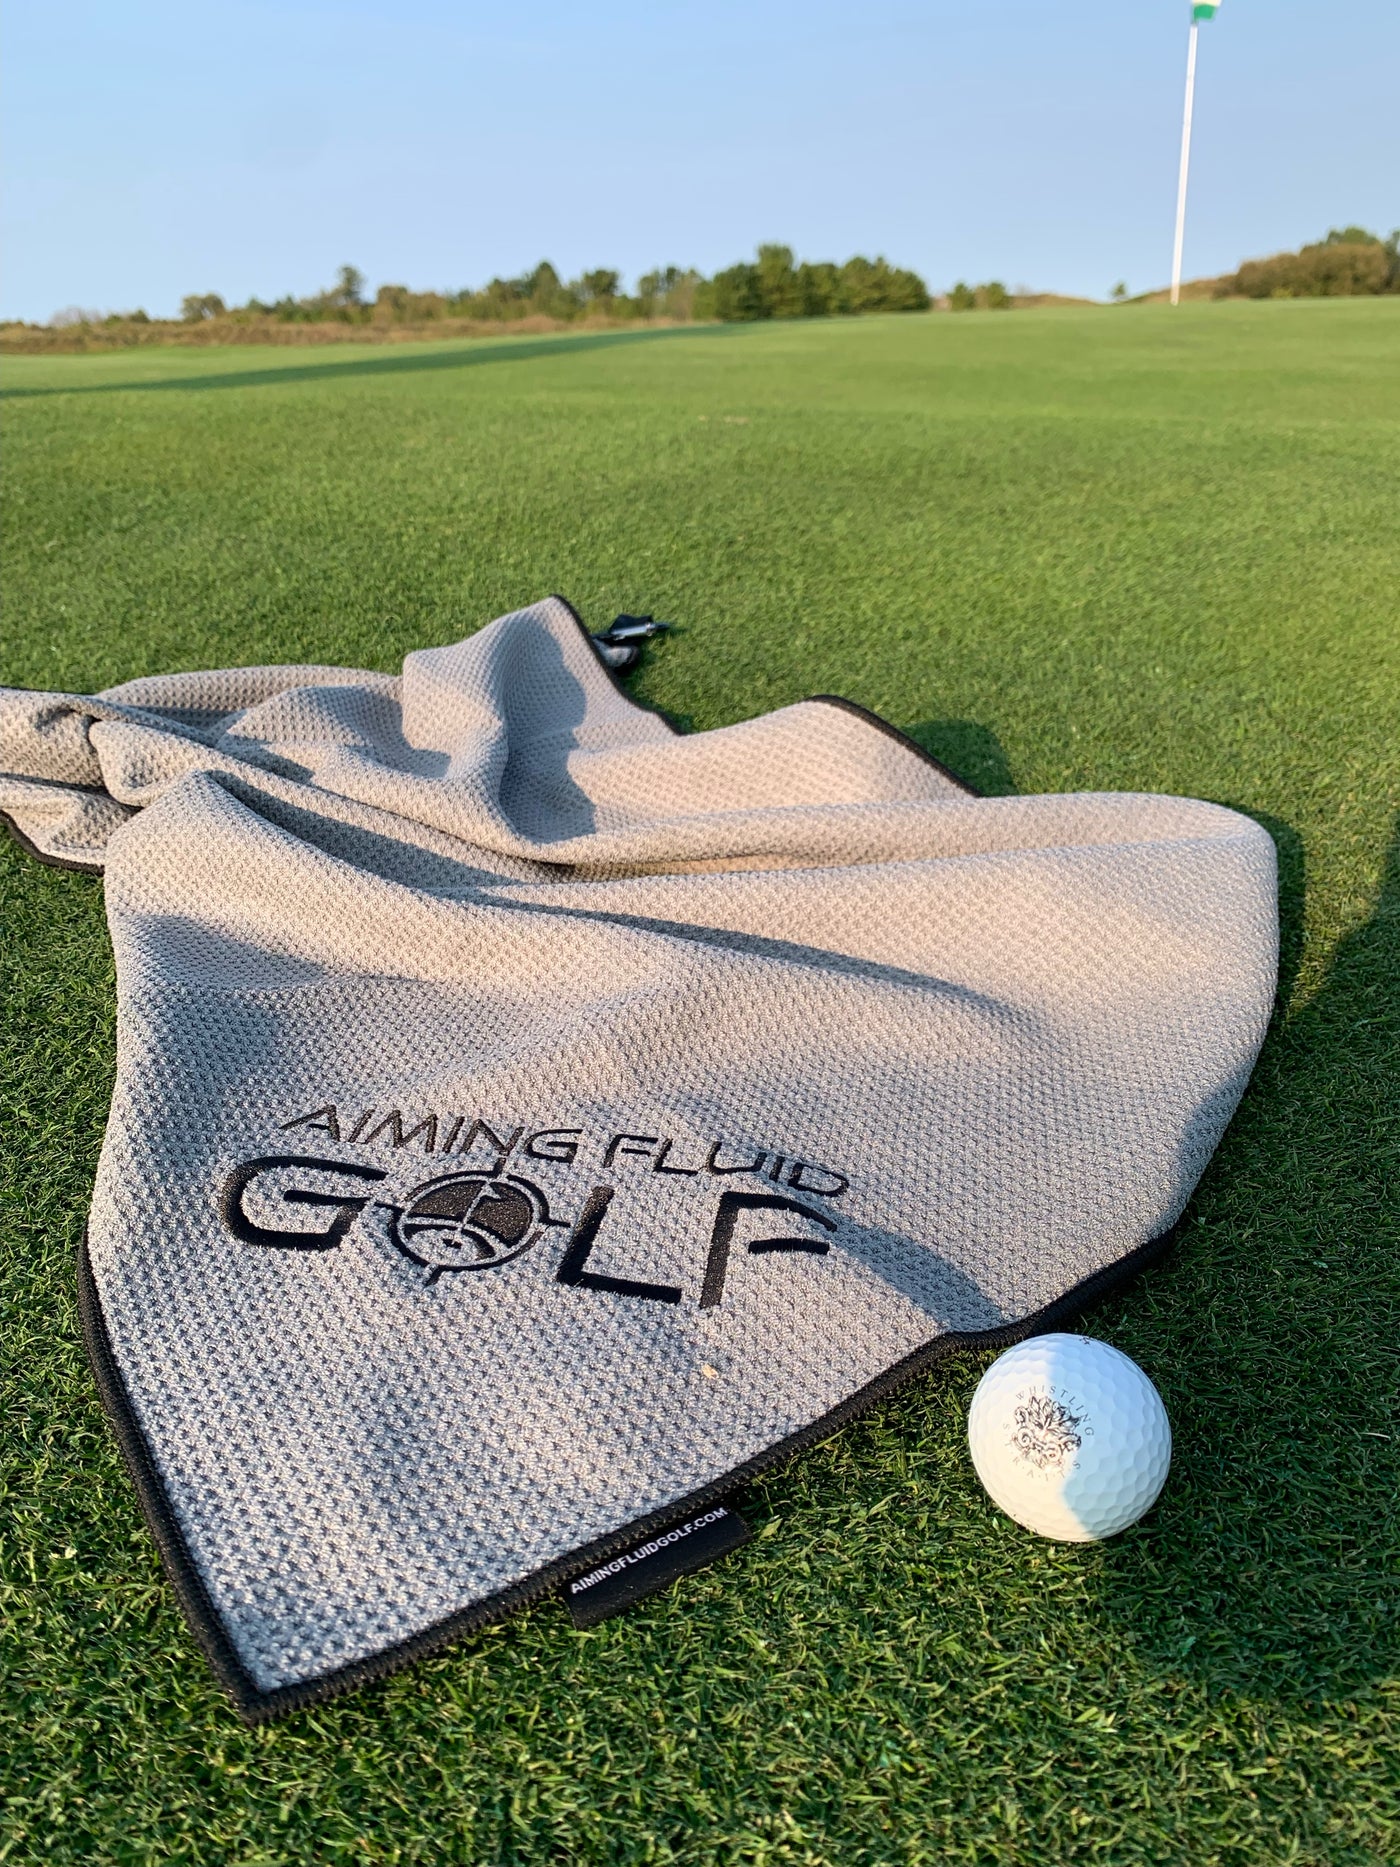 Aiming Fluid Golf (THE BEST TOWEL IN GOLF) Magnetic Towel Tall Boy (Large) in color grey laying on the green